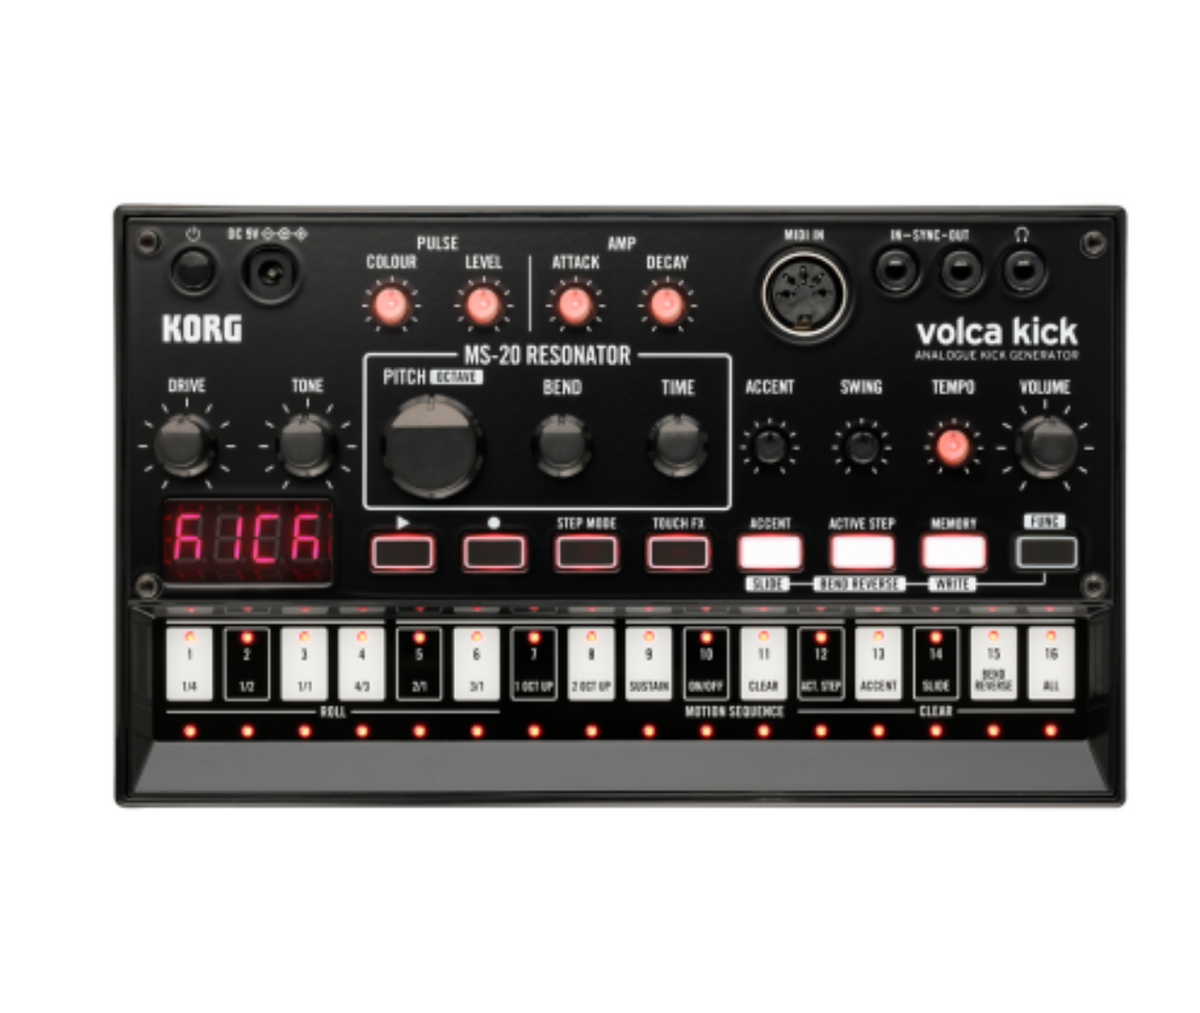 KORG volca kick Analogue Kick Generator Best Synthesizer Machine with 16-step Sequencer and Touch FX Controls Realtime Sequence Effects